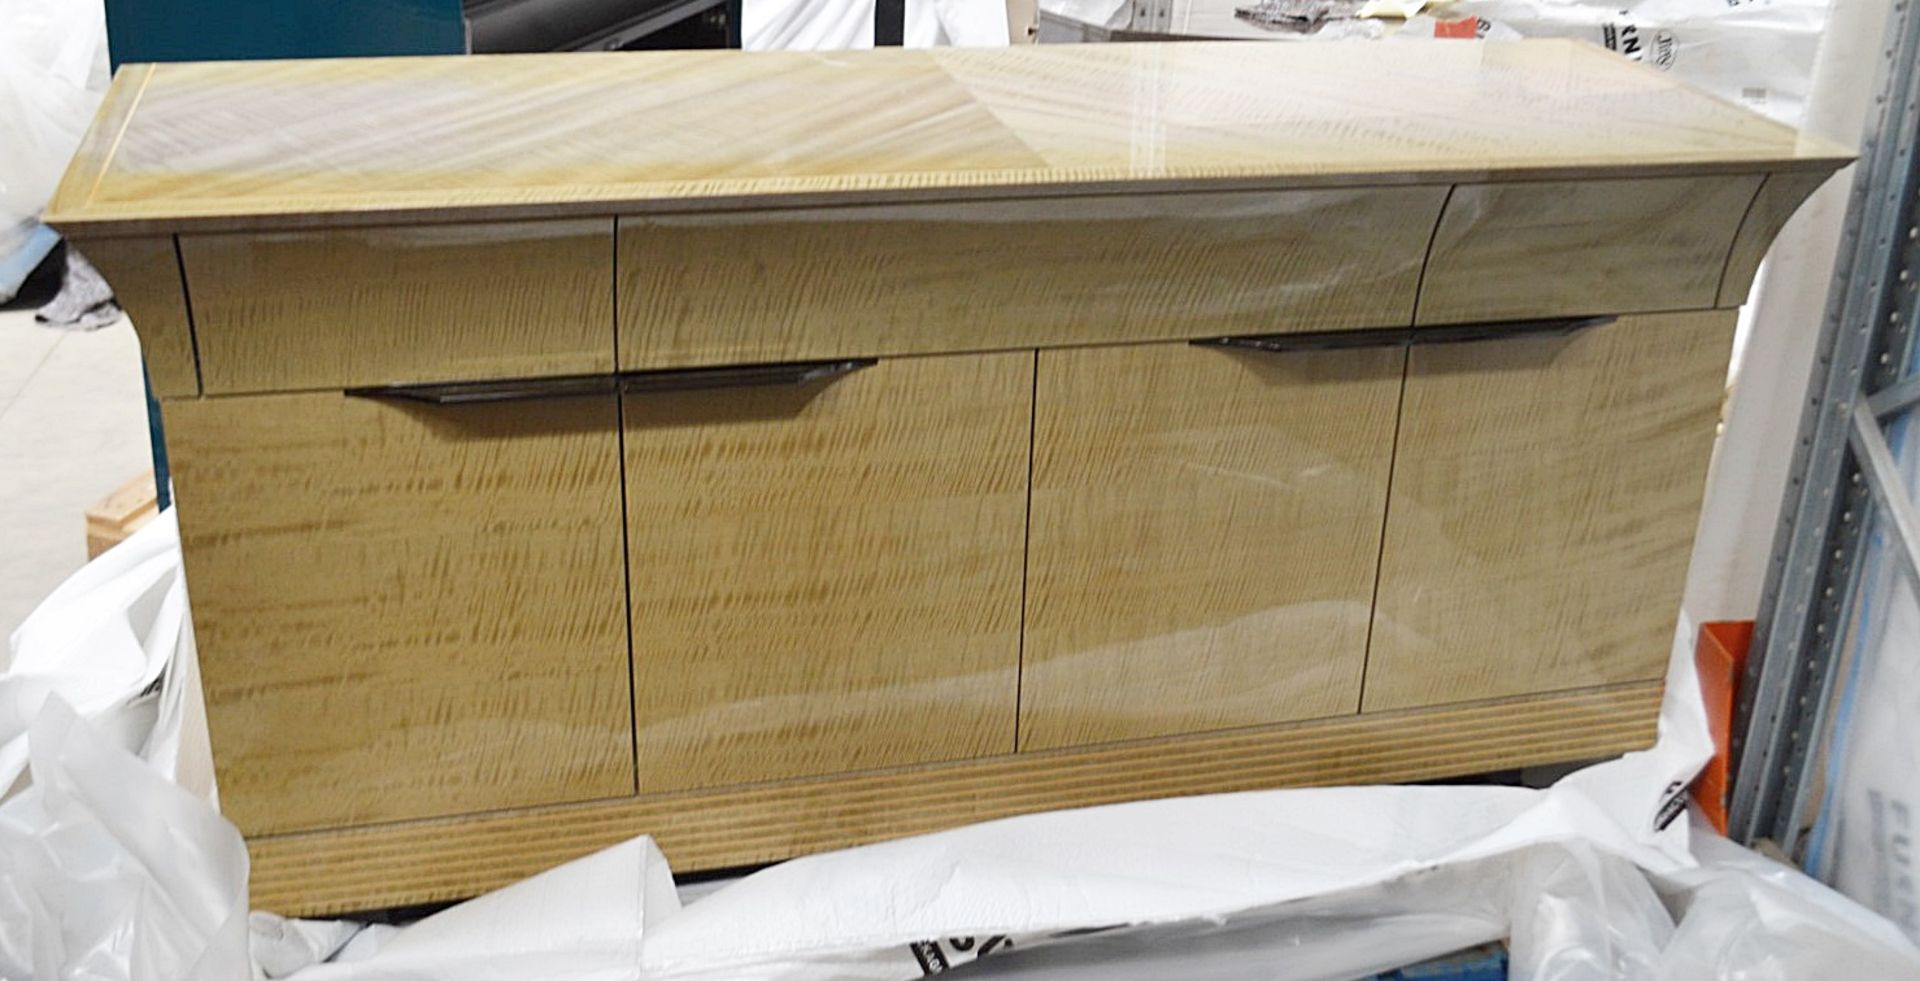 1 x GIORGIO COLLECTION 'Alchemy' Buffet / Sideboard Unit (Model: 6810/80) - Original RRP £3,495 - Image 8 of 8